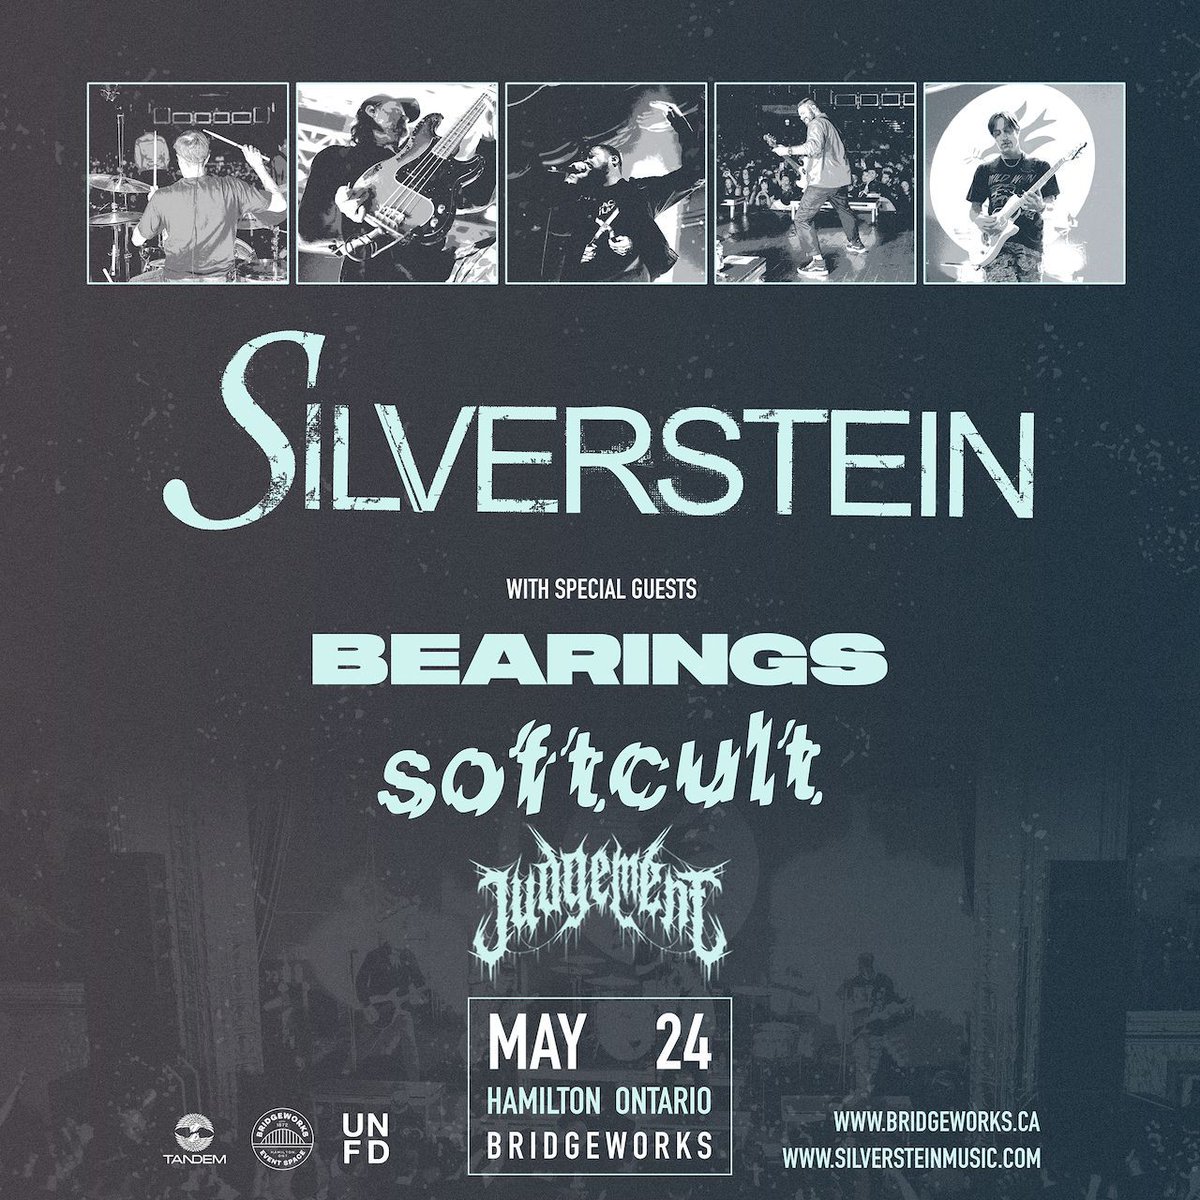 JUST ANNOUNCED: Punk stalwarts @Silverstein hit Bridgeworks on May 24 with special guests Bearings, softcult and Judgement! Tickets are on sale NOW - get yours at bridgeworks.ca! #hamont